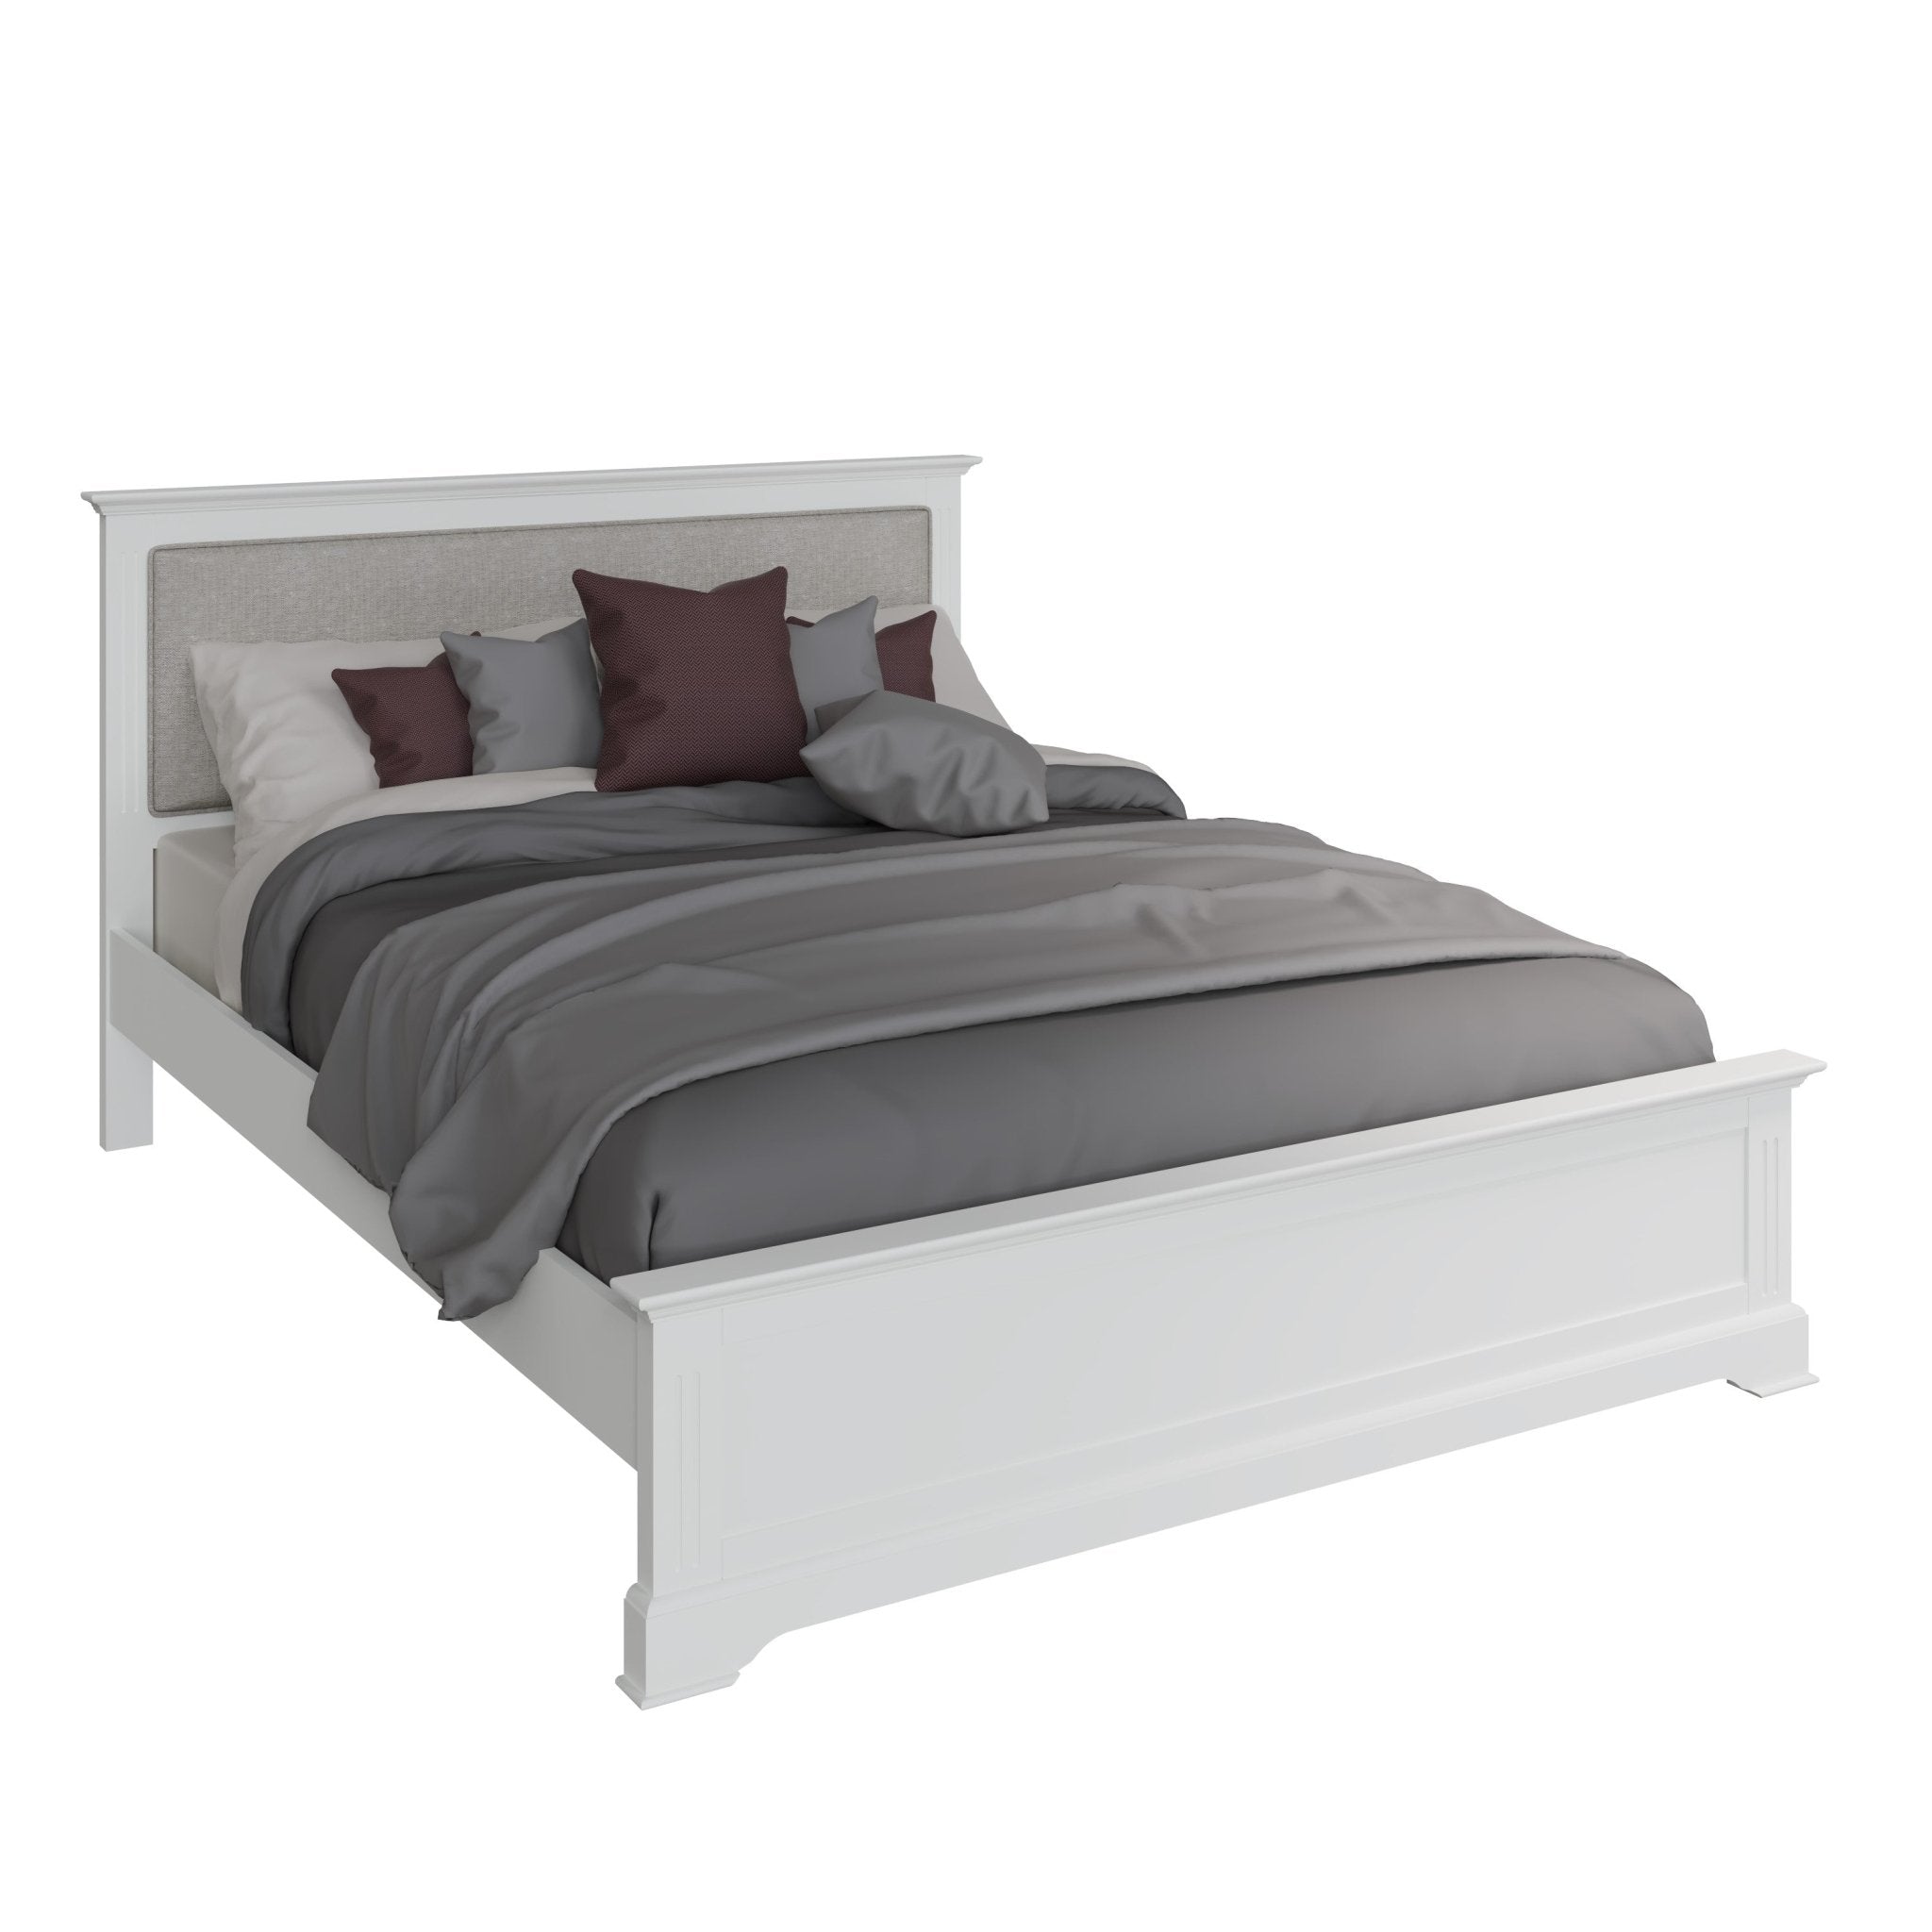 Snowdrop White Painted Kingsize Bed Frame - 5ft - Duck Barn Interiors